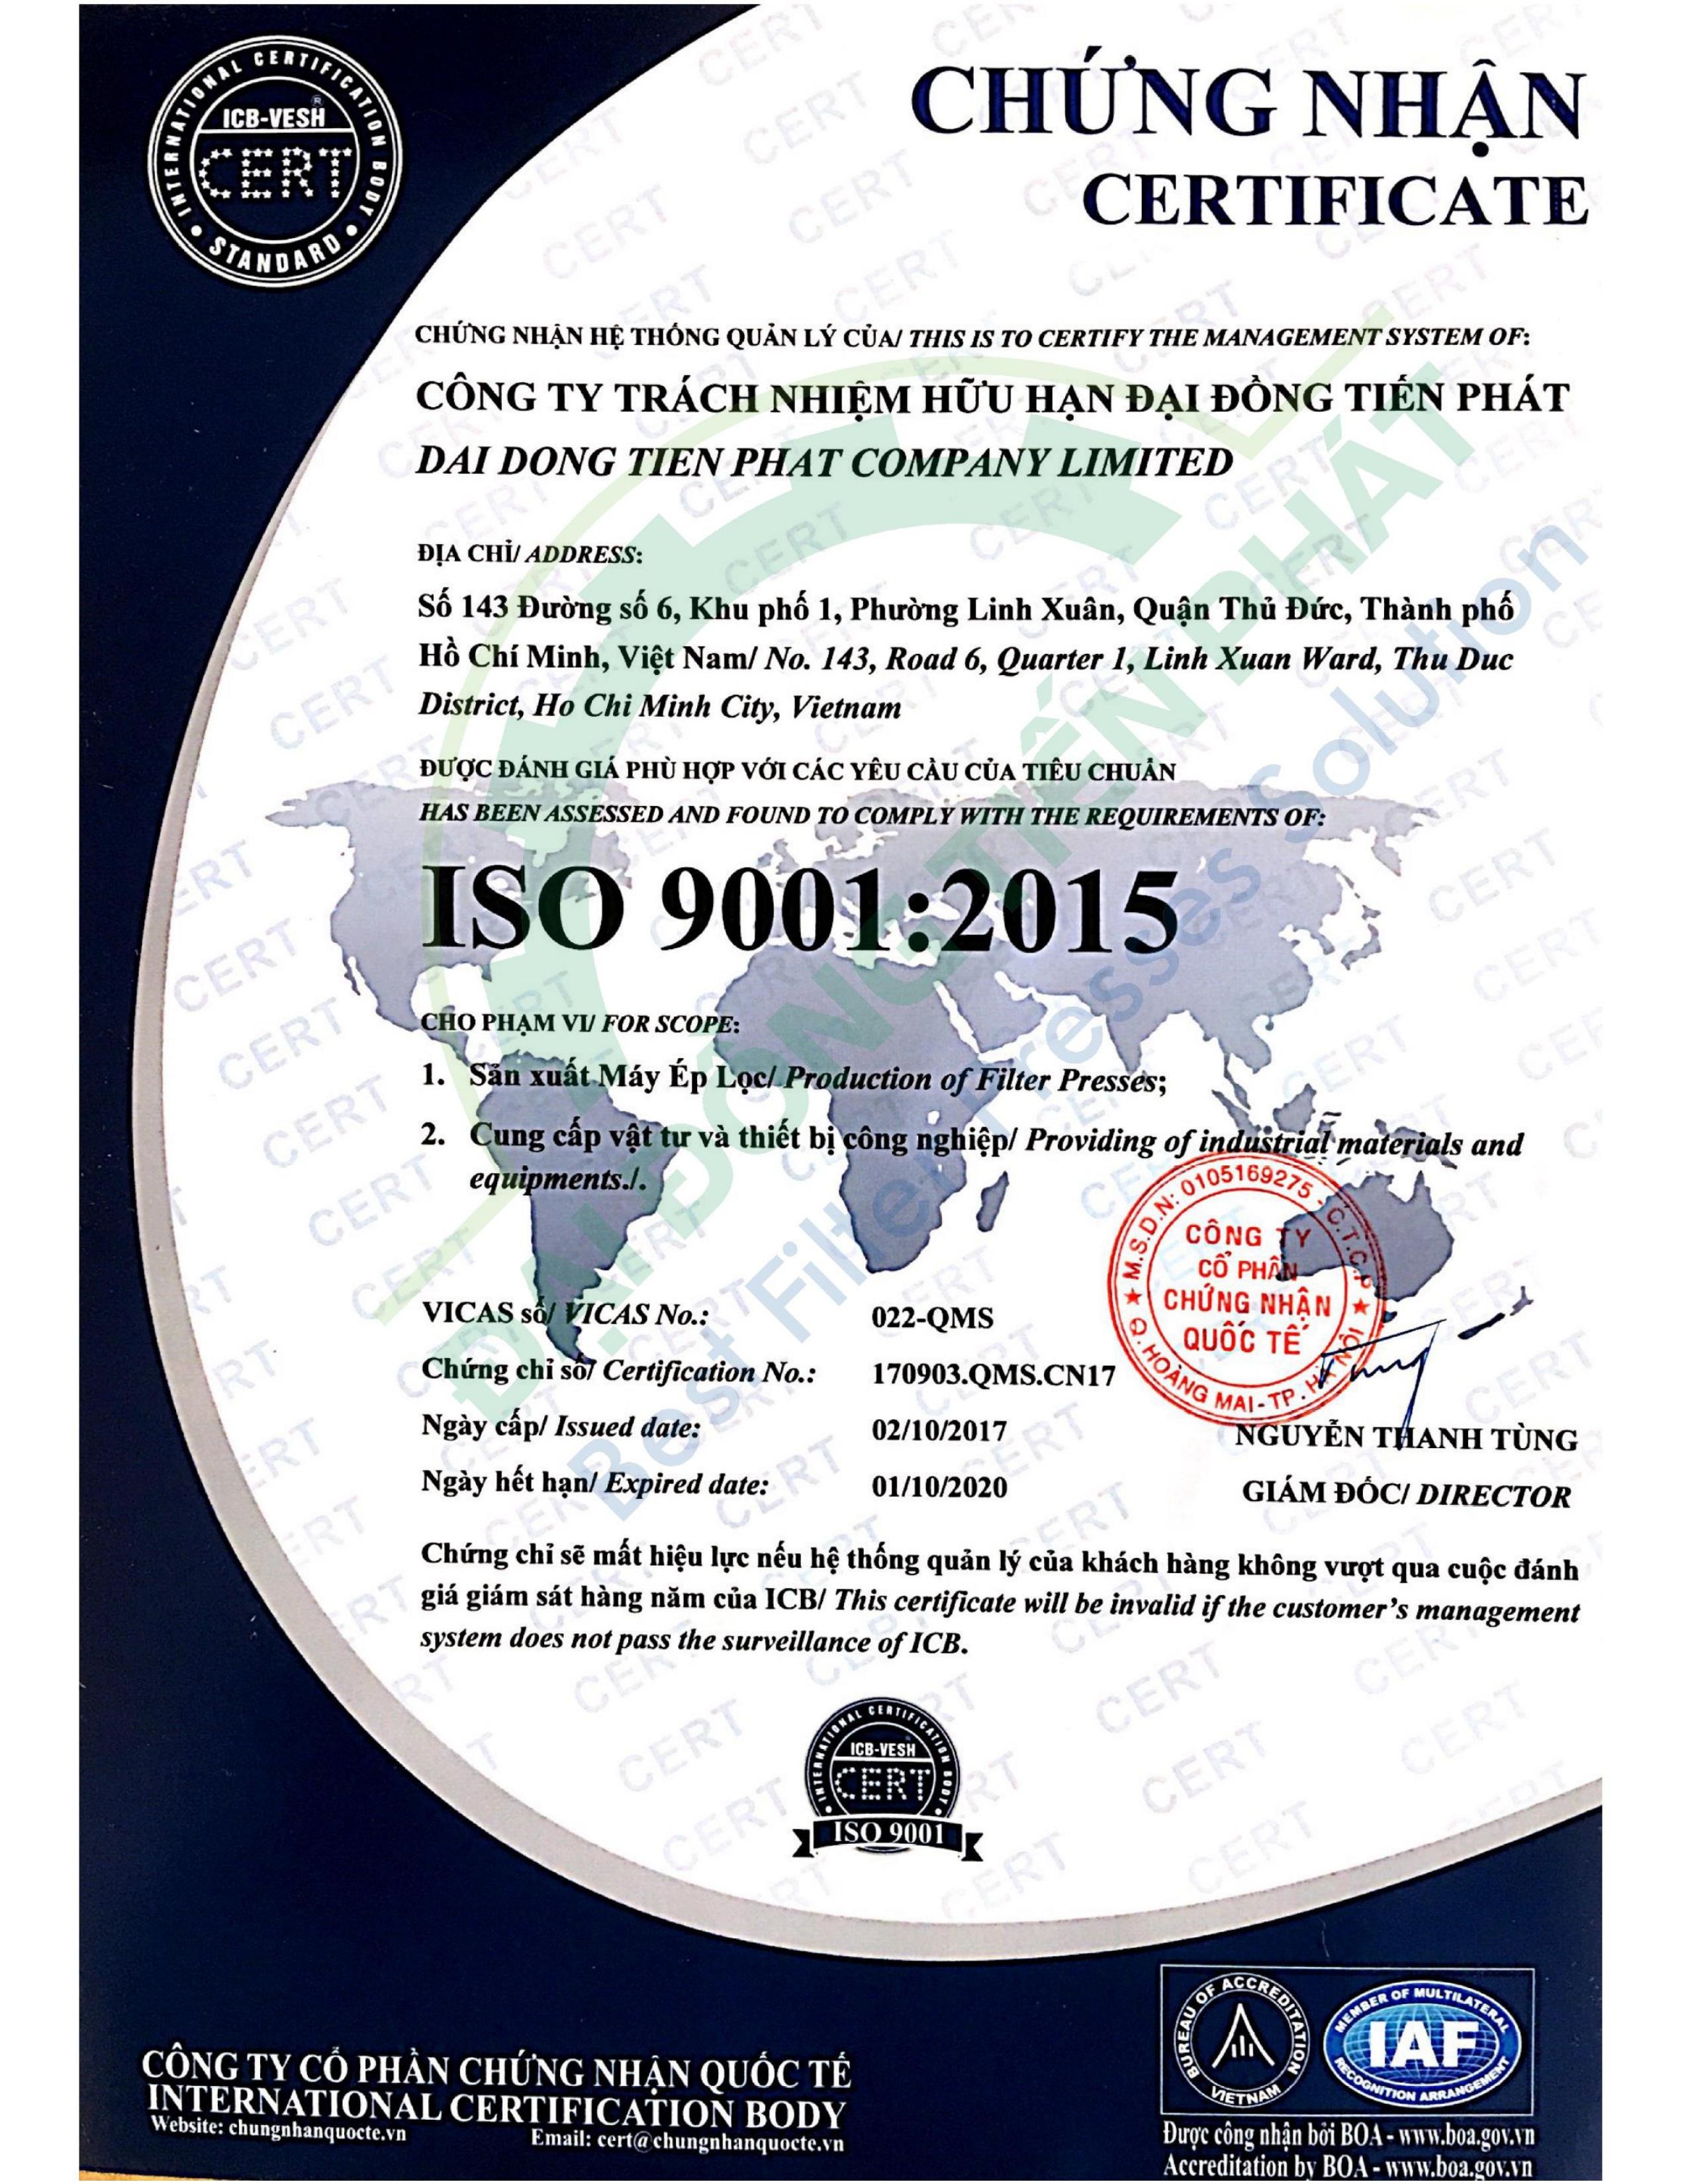 Chứng chỉ Iso 9001:2015